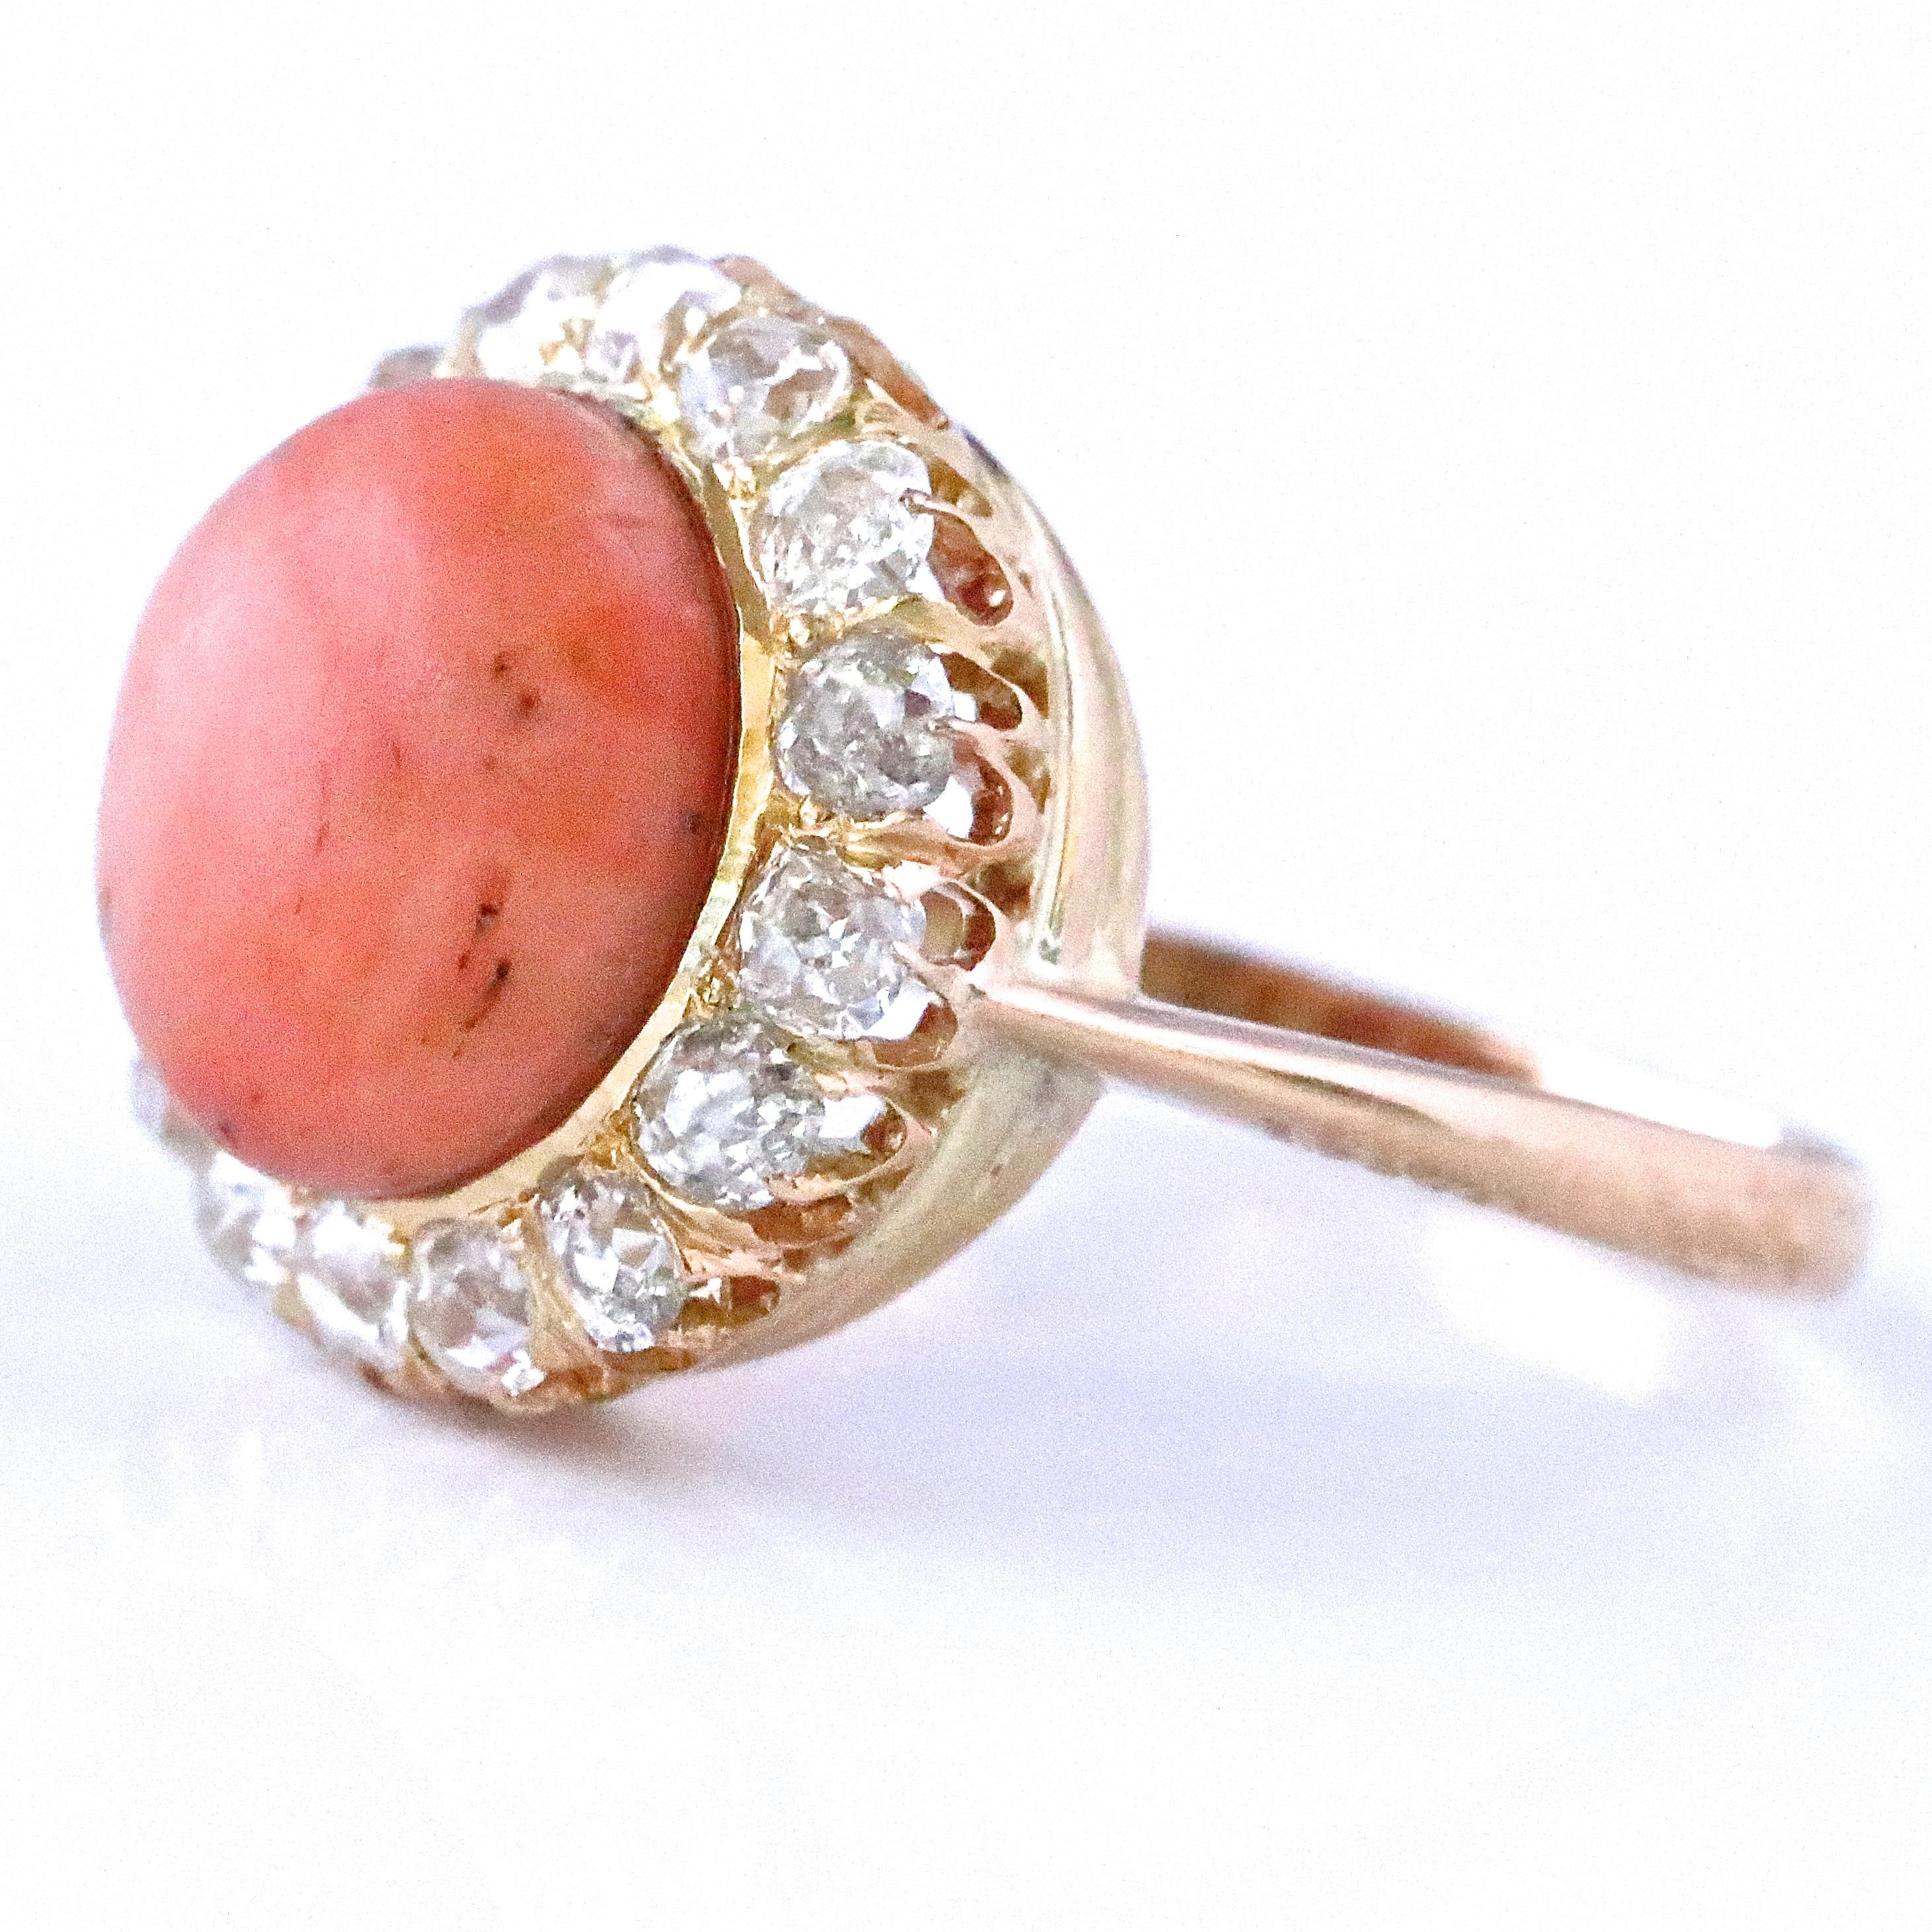 The Victorian period was a time of royalty, lavish lifestyle and beauty and this Victorian Style Coral Diamond Cluster Ring reflects it all. The center stone is a cabochon cut coral approximately 6.00 carats. Accented by 16 old mine cut diamonds